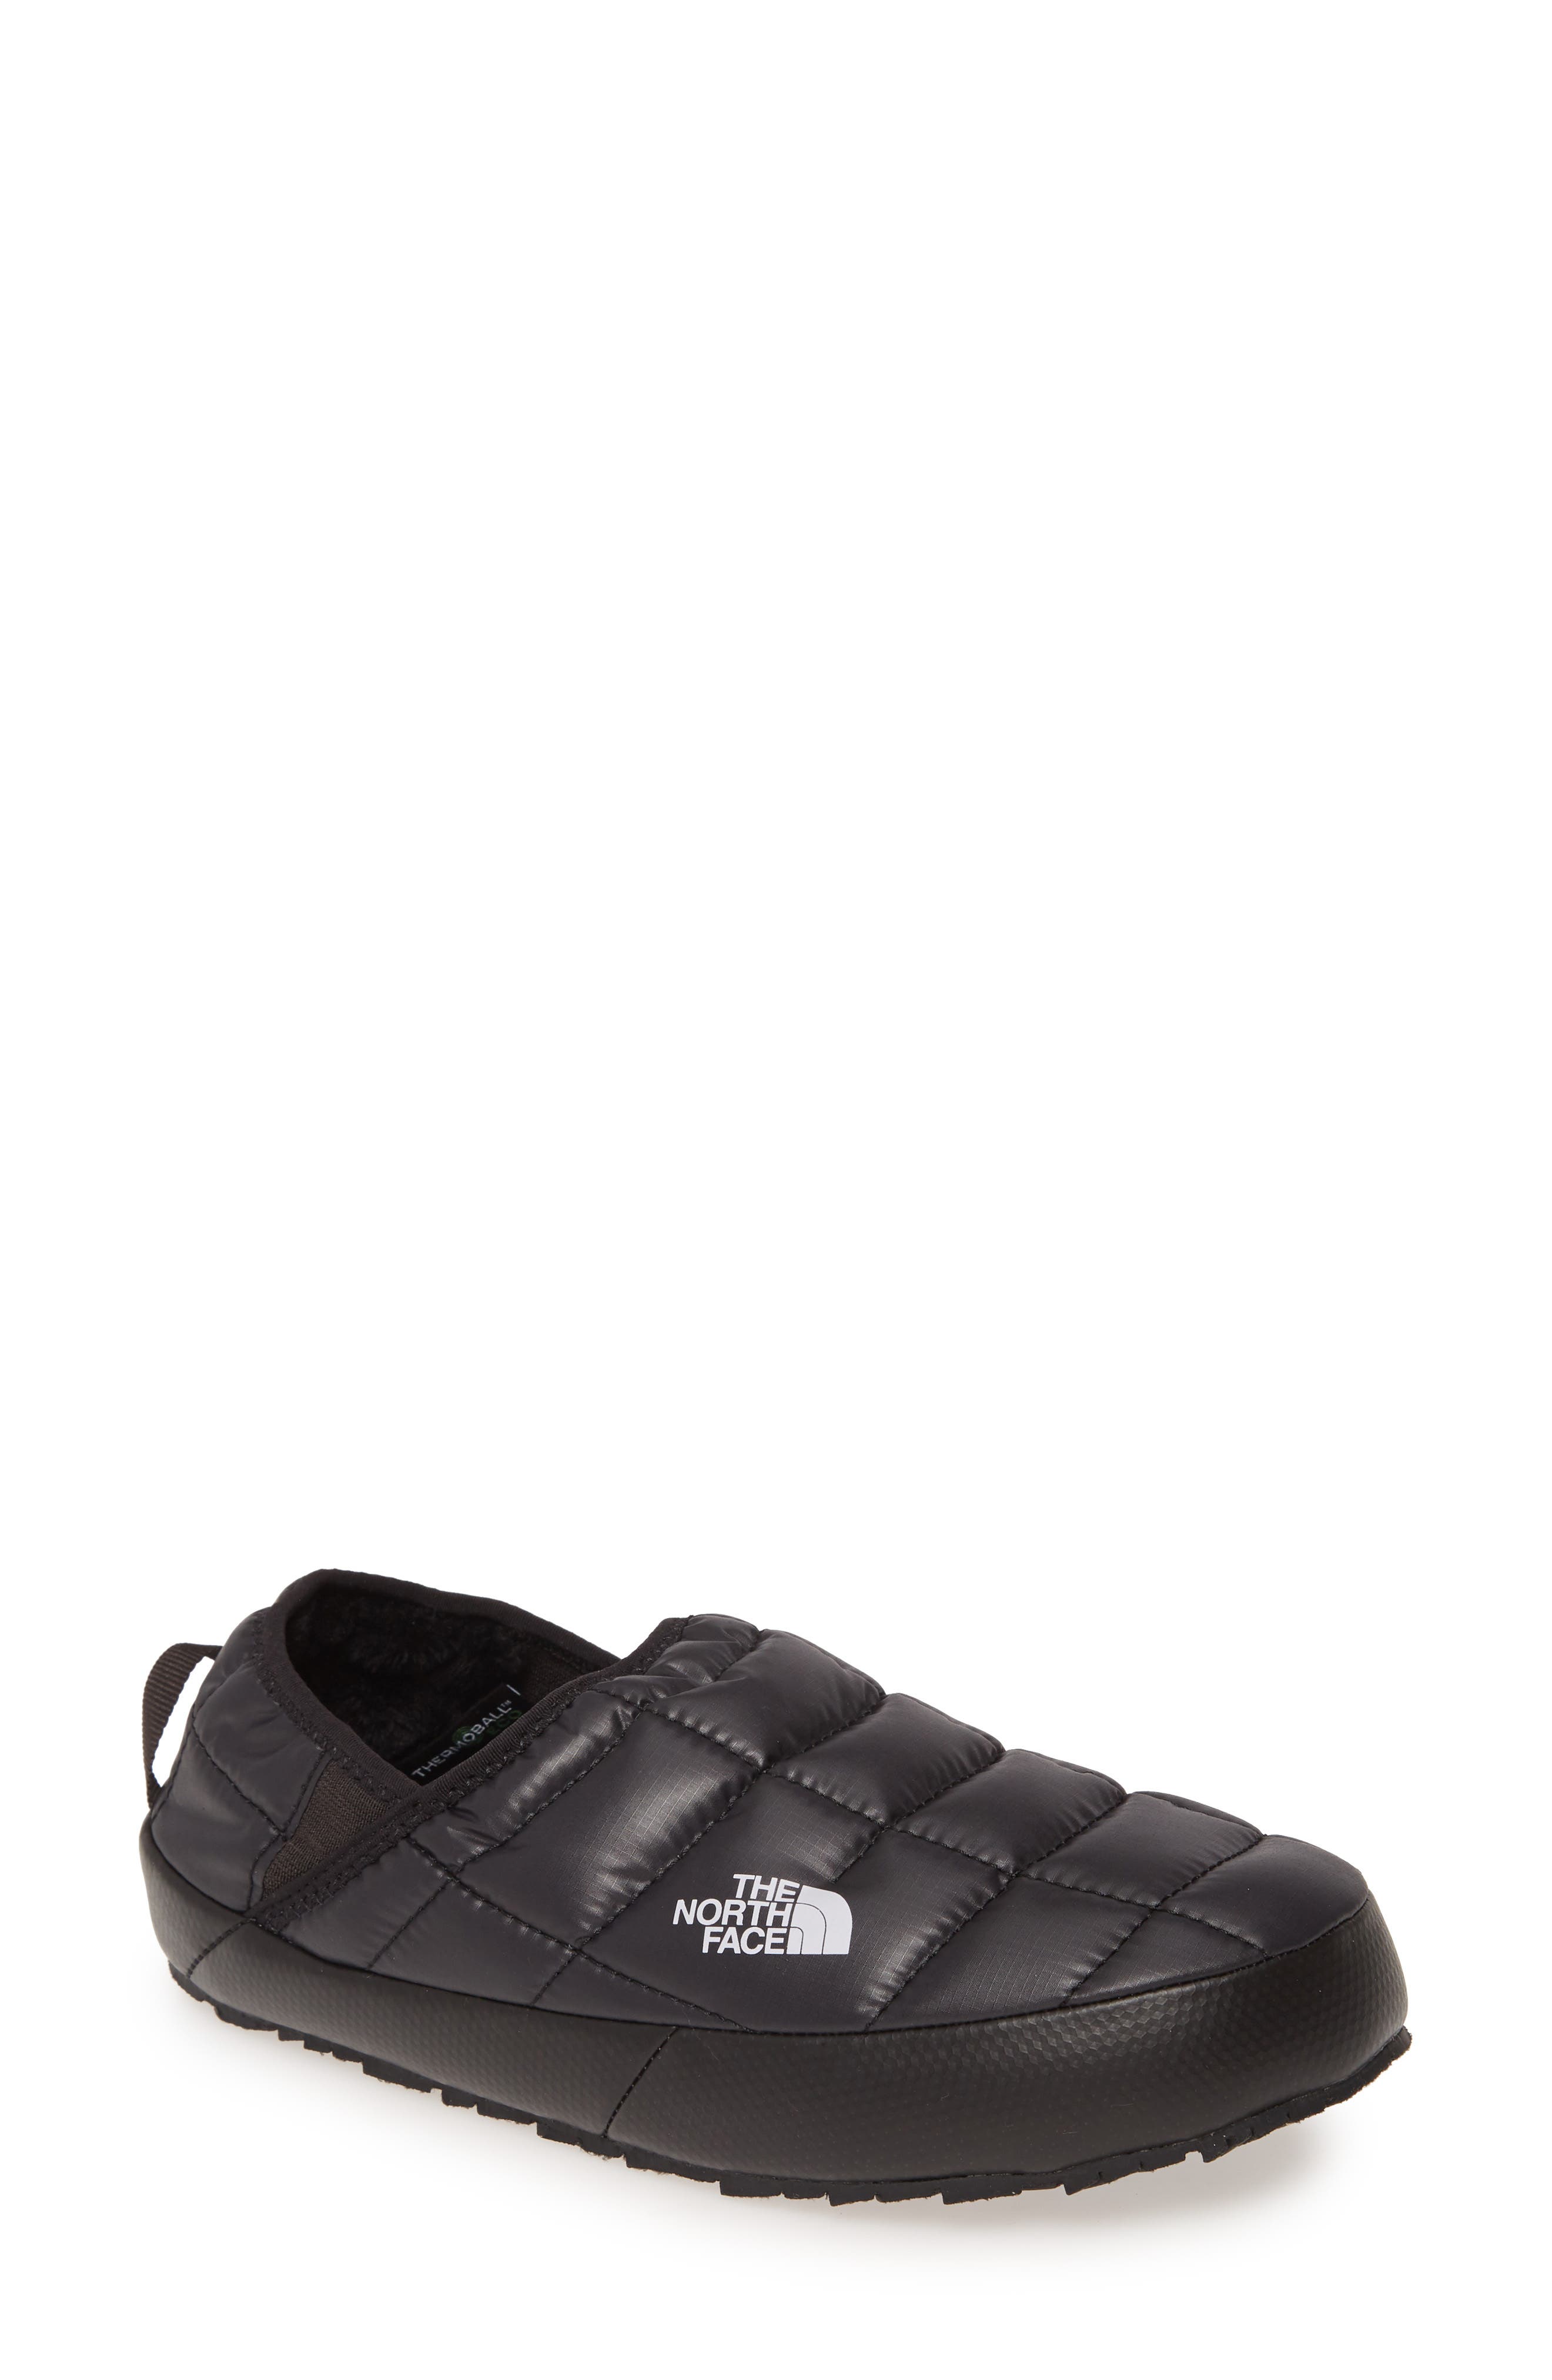 north face womens slippers